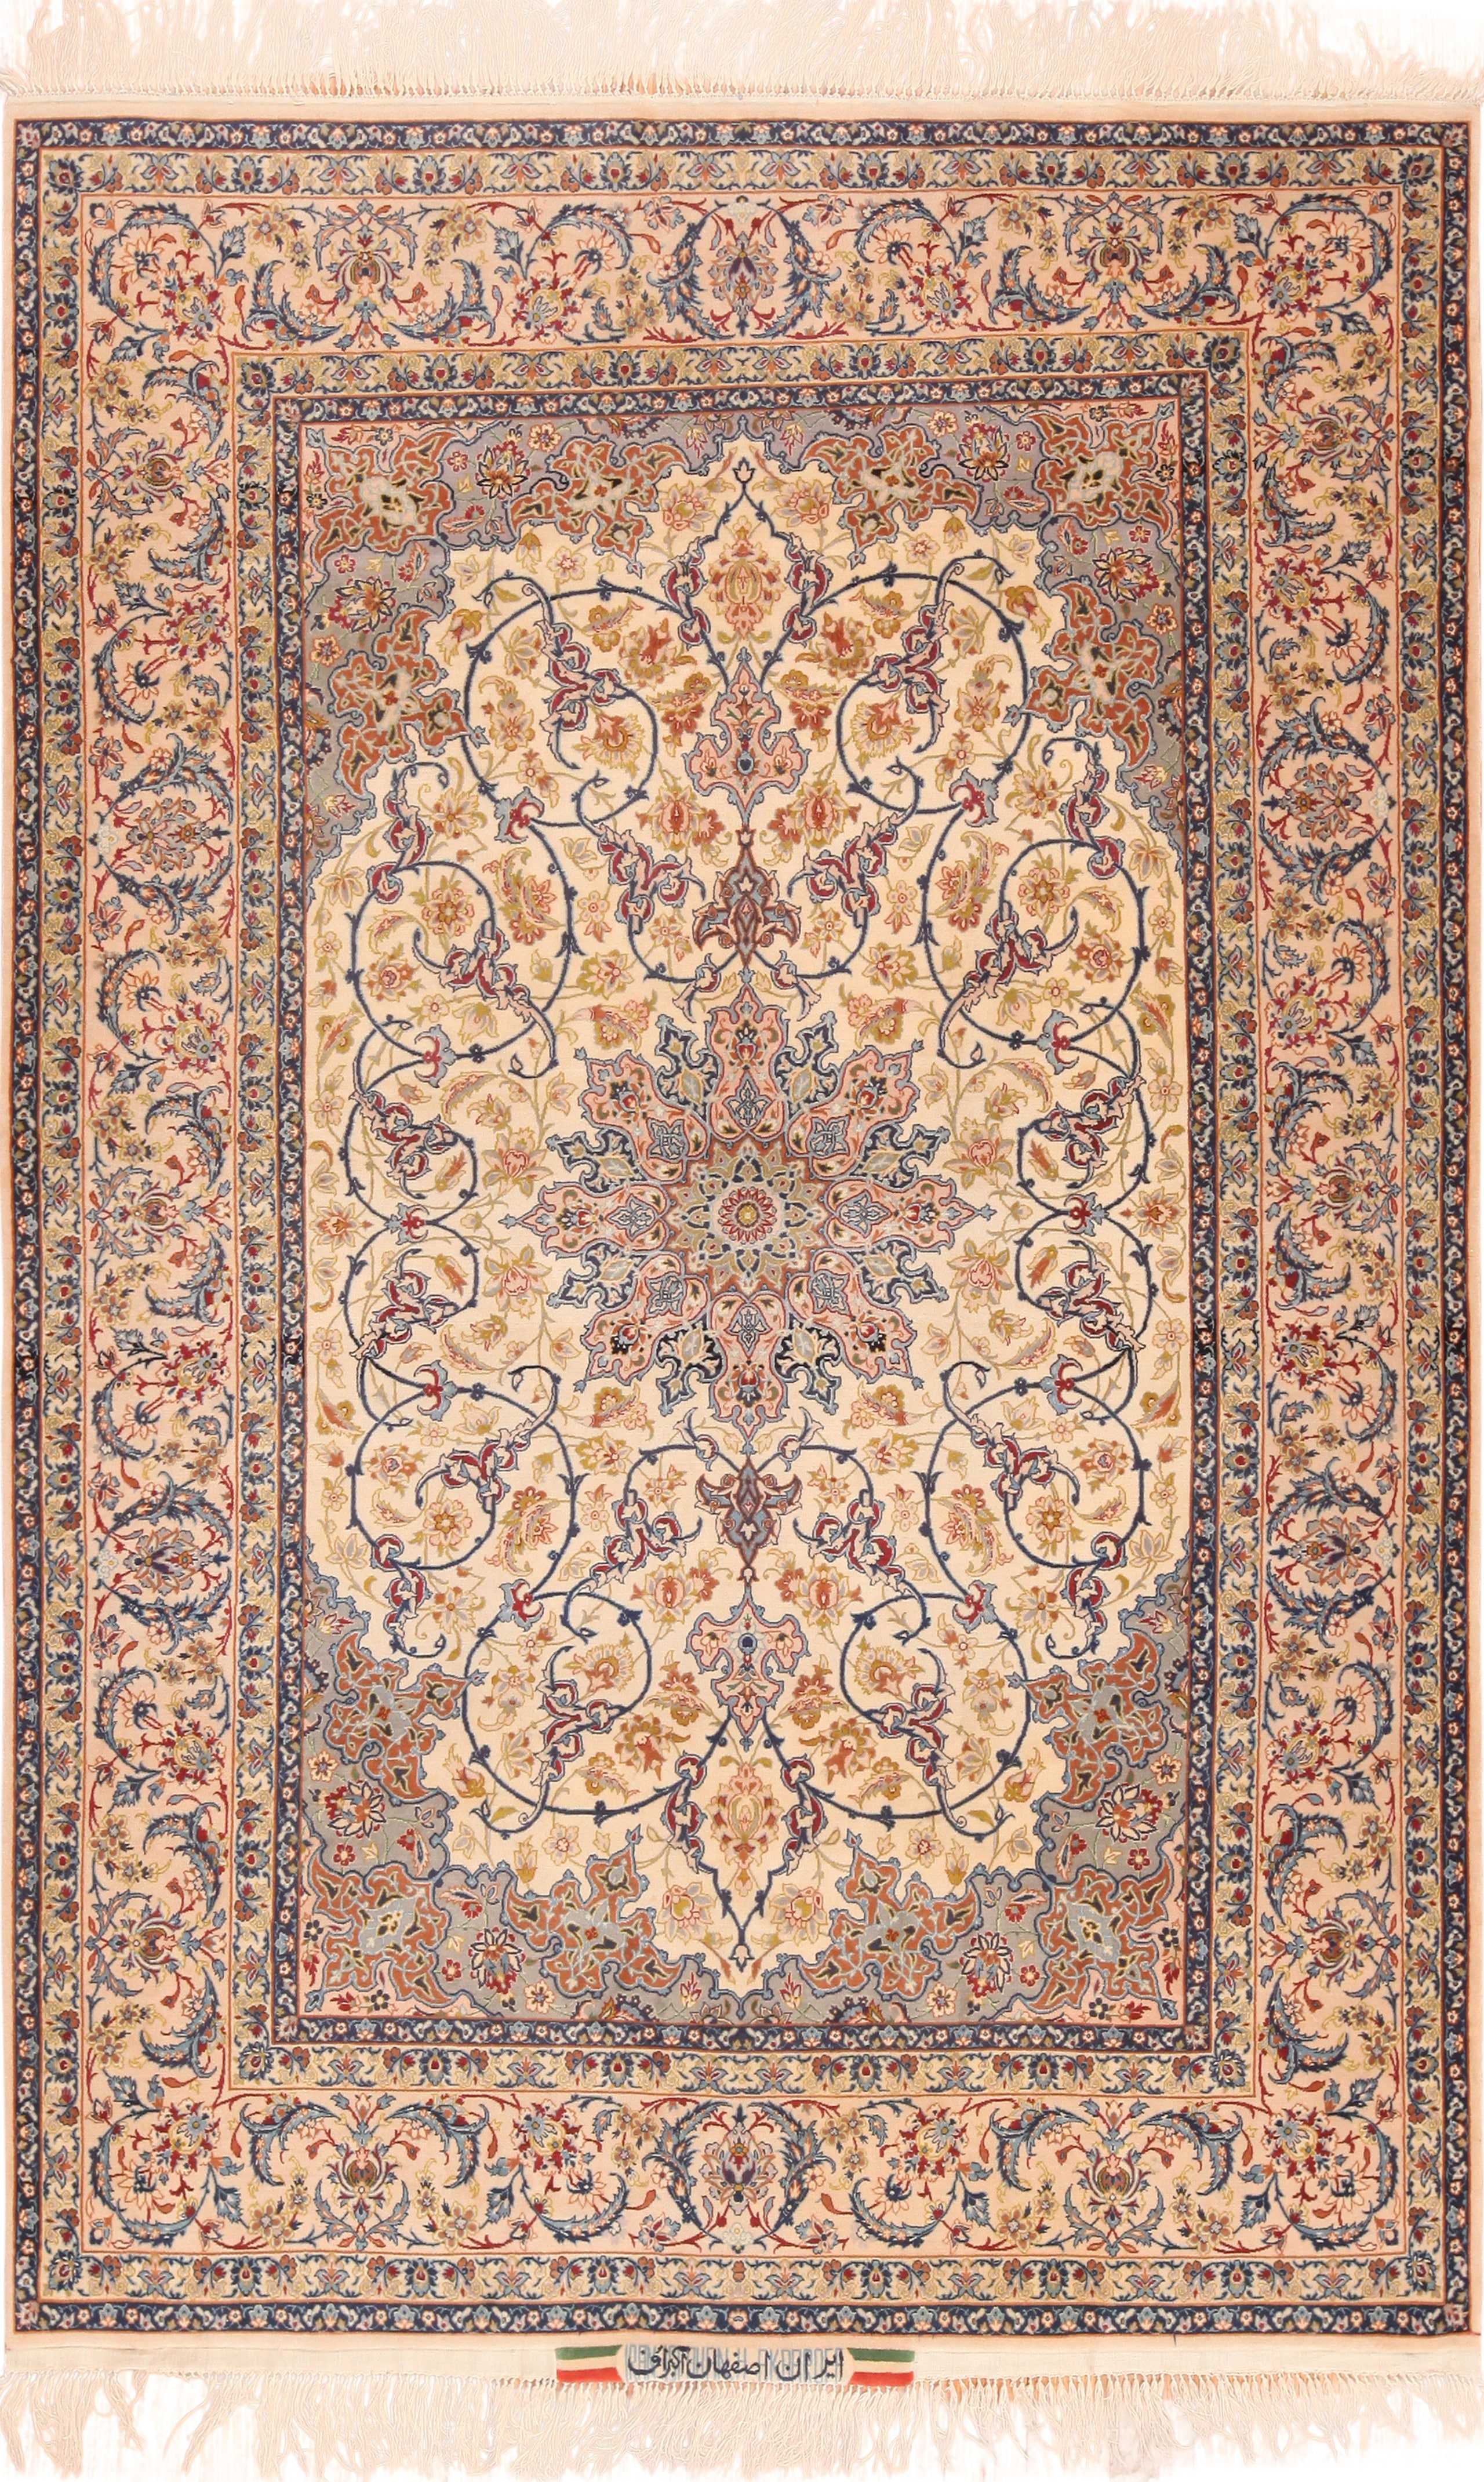 Magnificent Vintage Persian Floral Isfahan Rug 71203 by Nazmiyal Antique Rugs